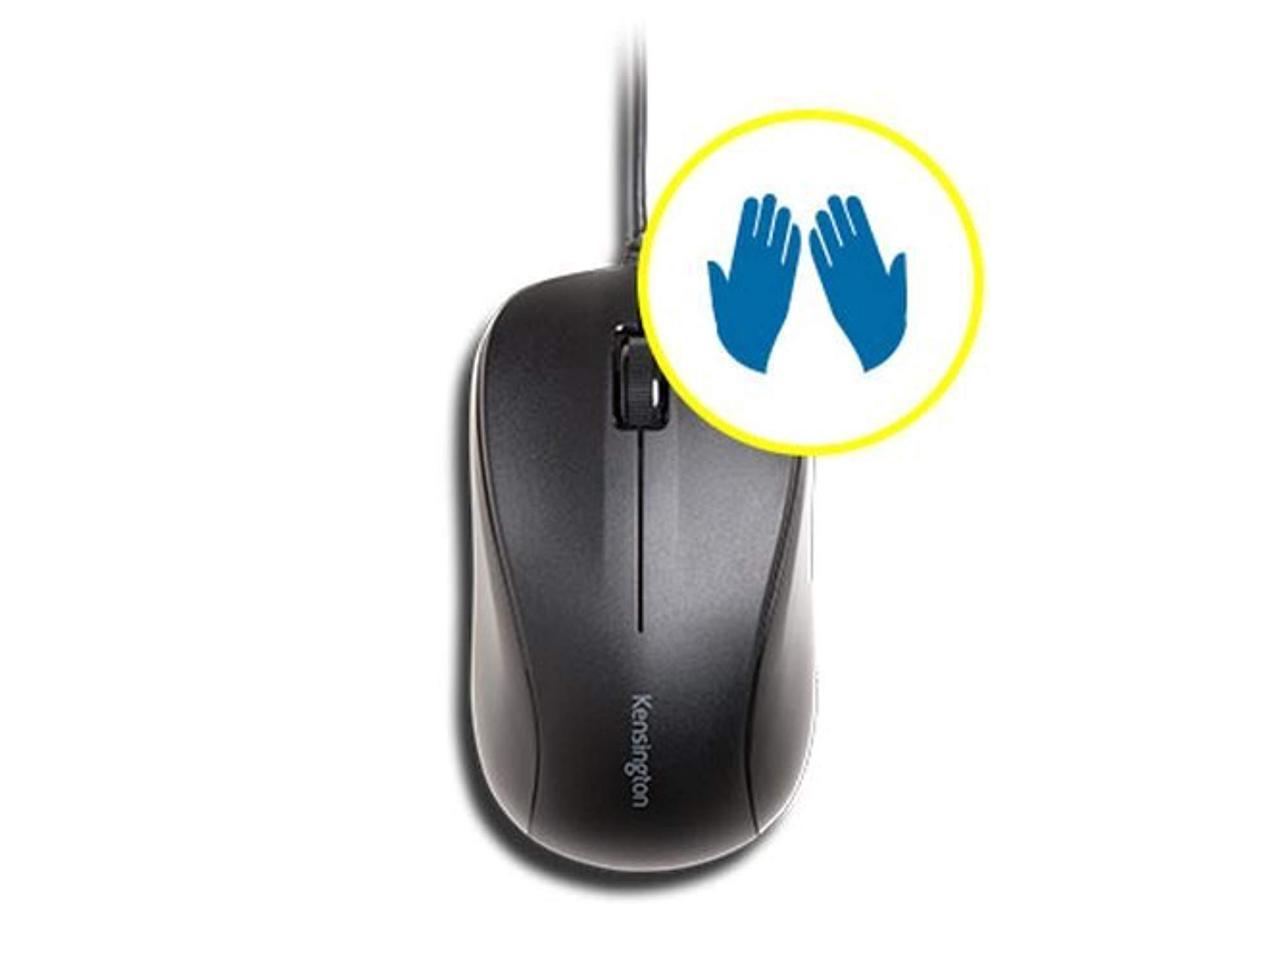 Kensington K74531WW Black 3 Buttons USB Wired Optical 1000 dpi Mouse